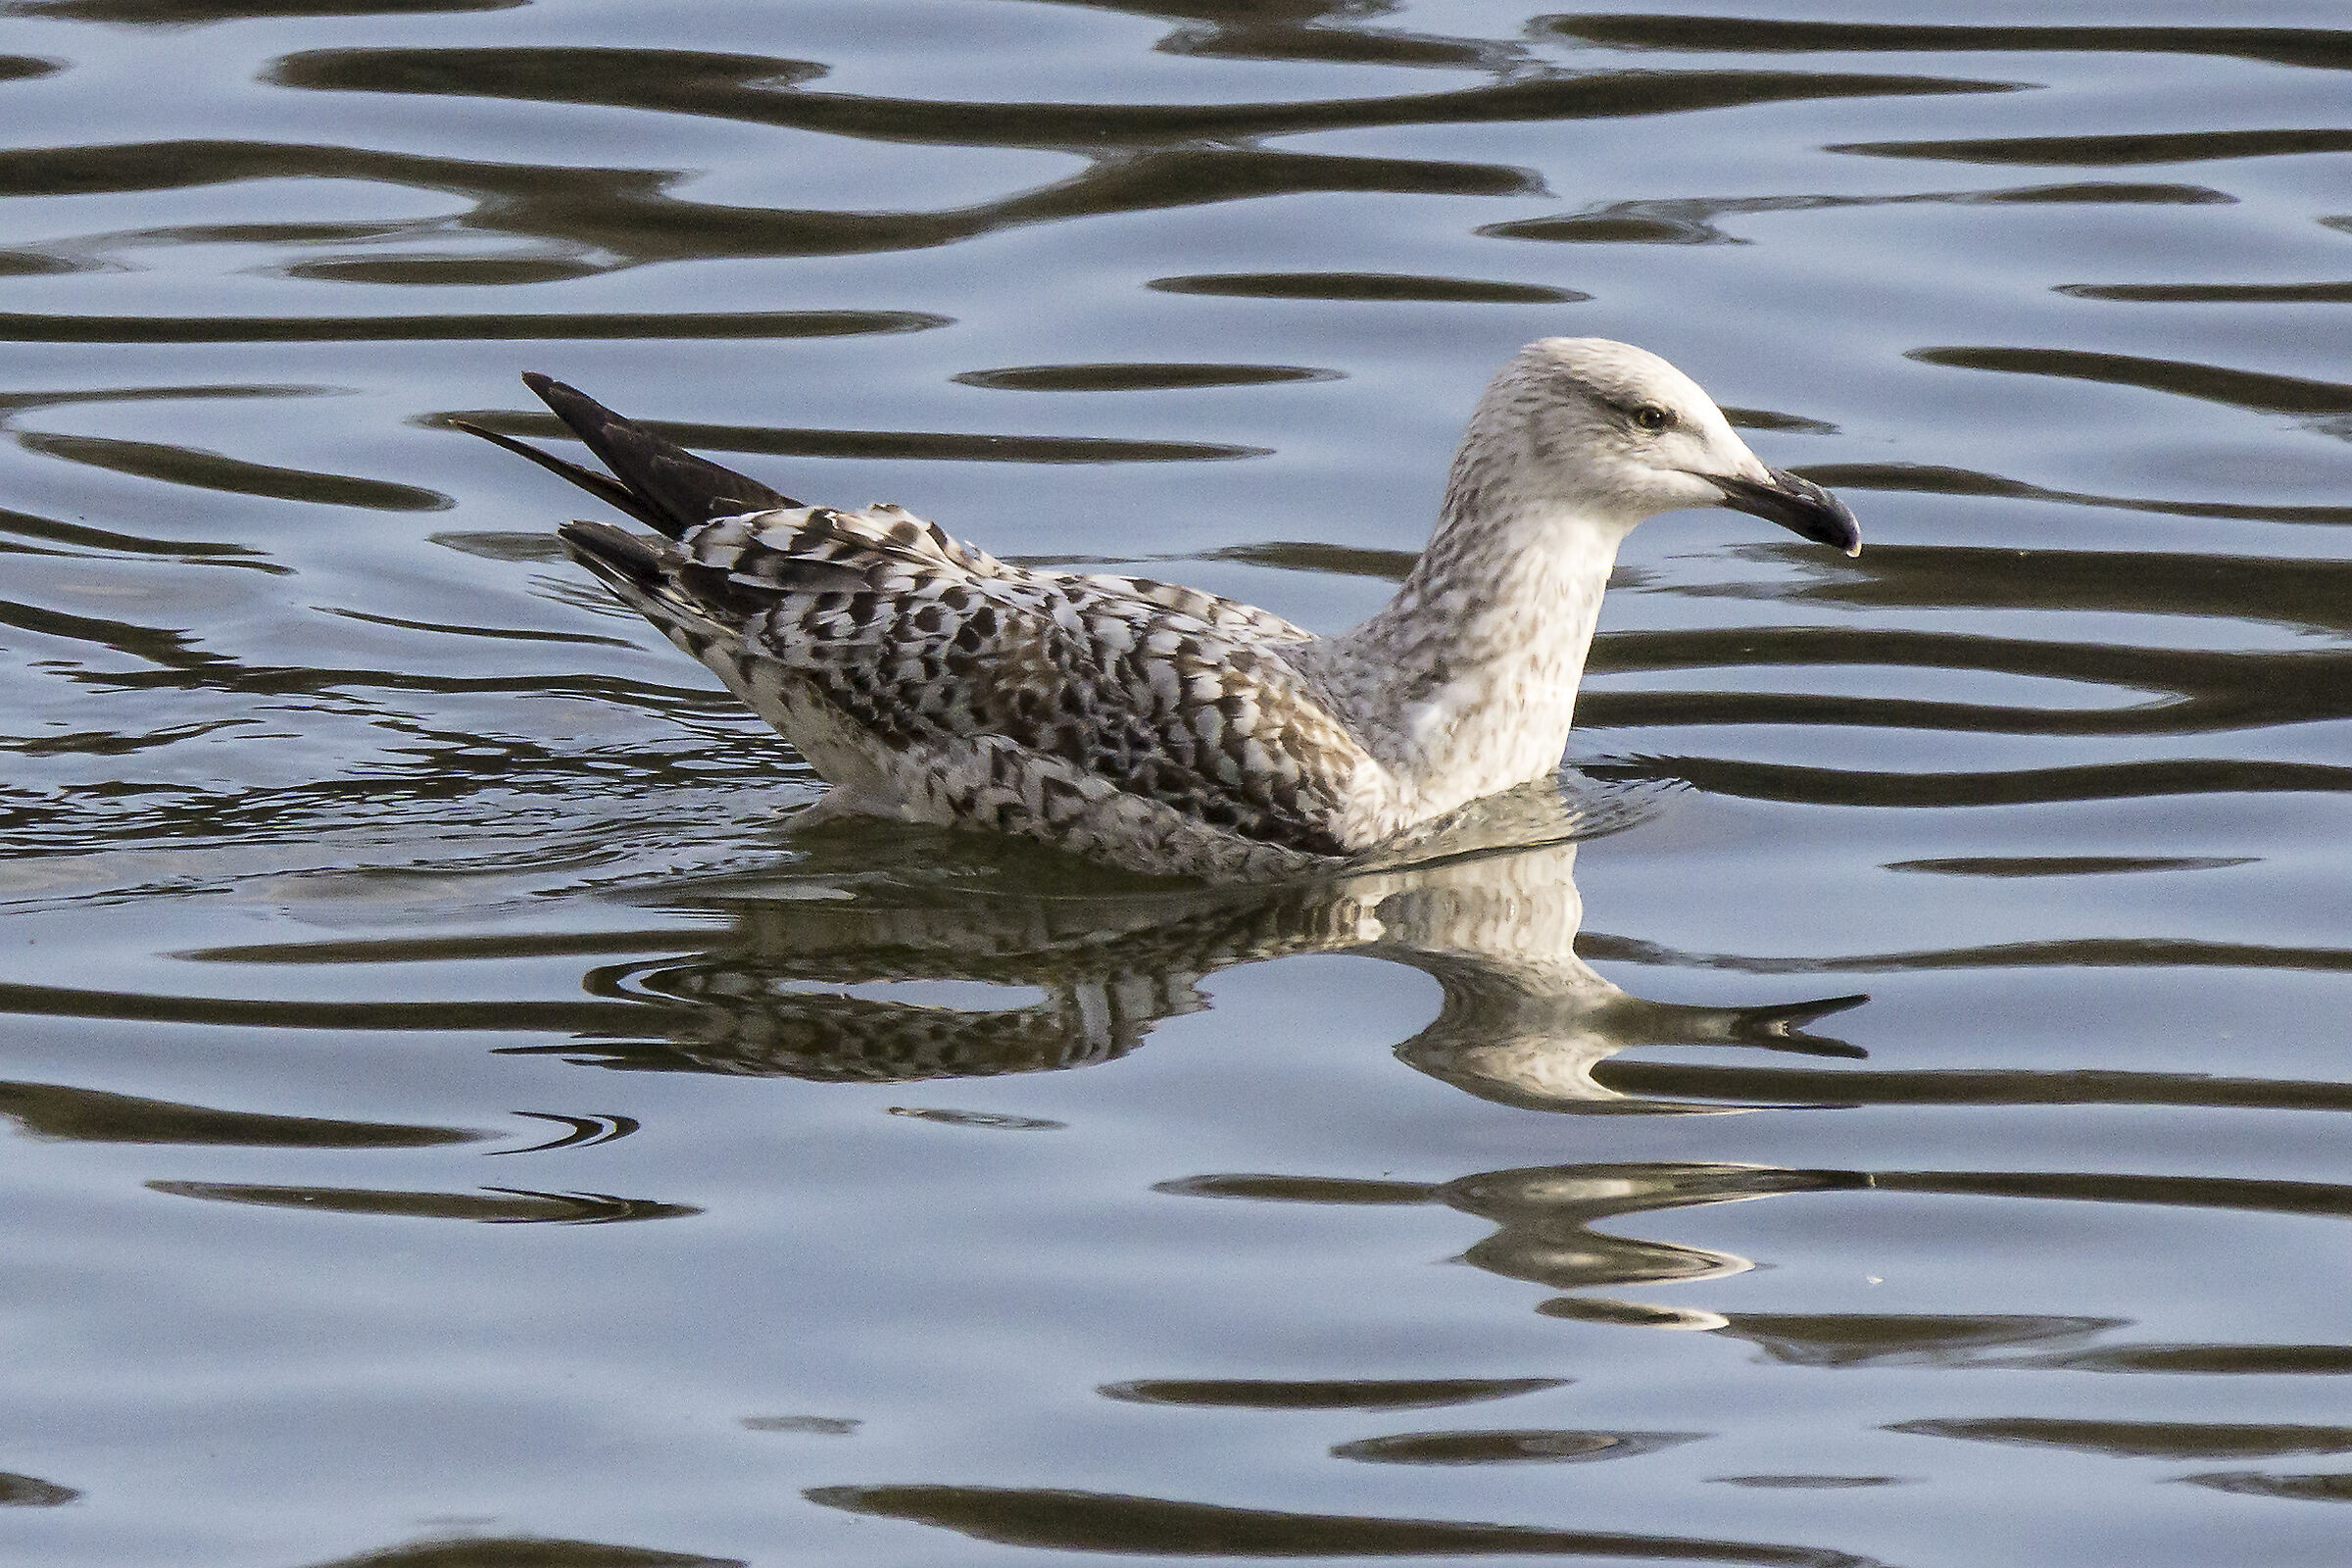 Young Seagull Swimming in the vicinity of the Coot...